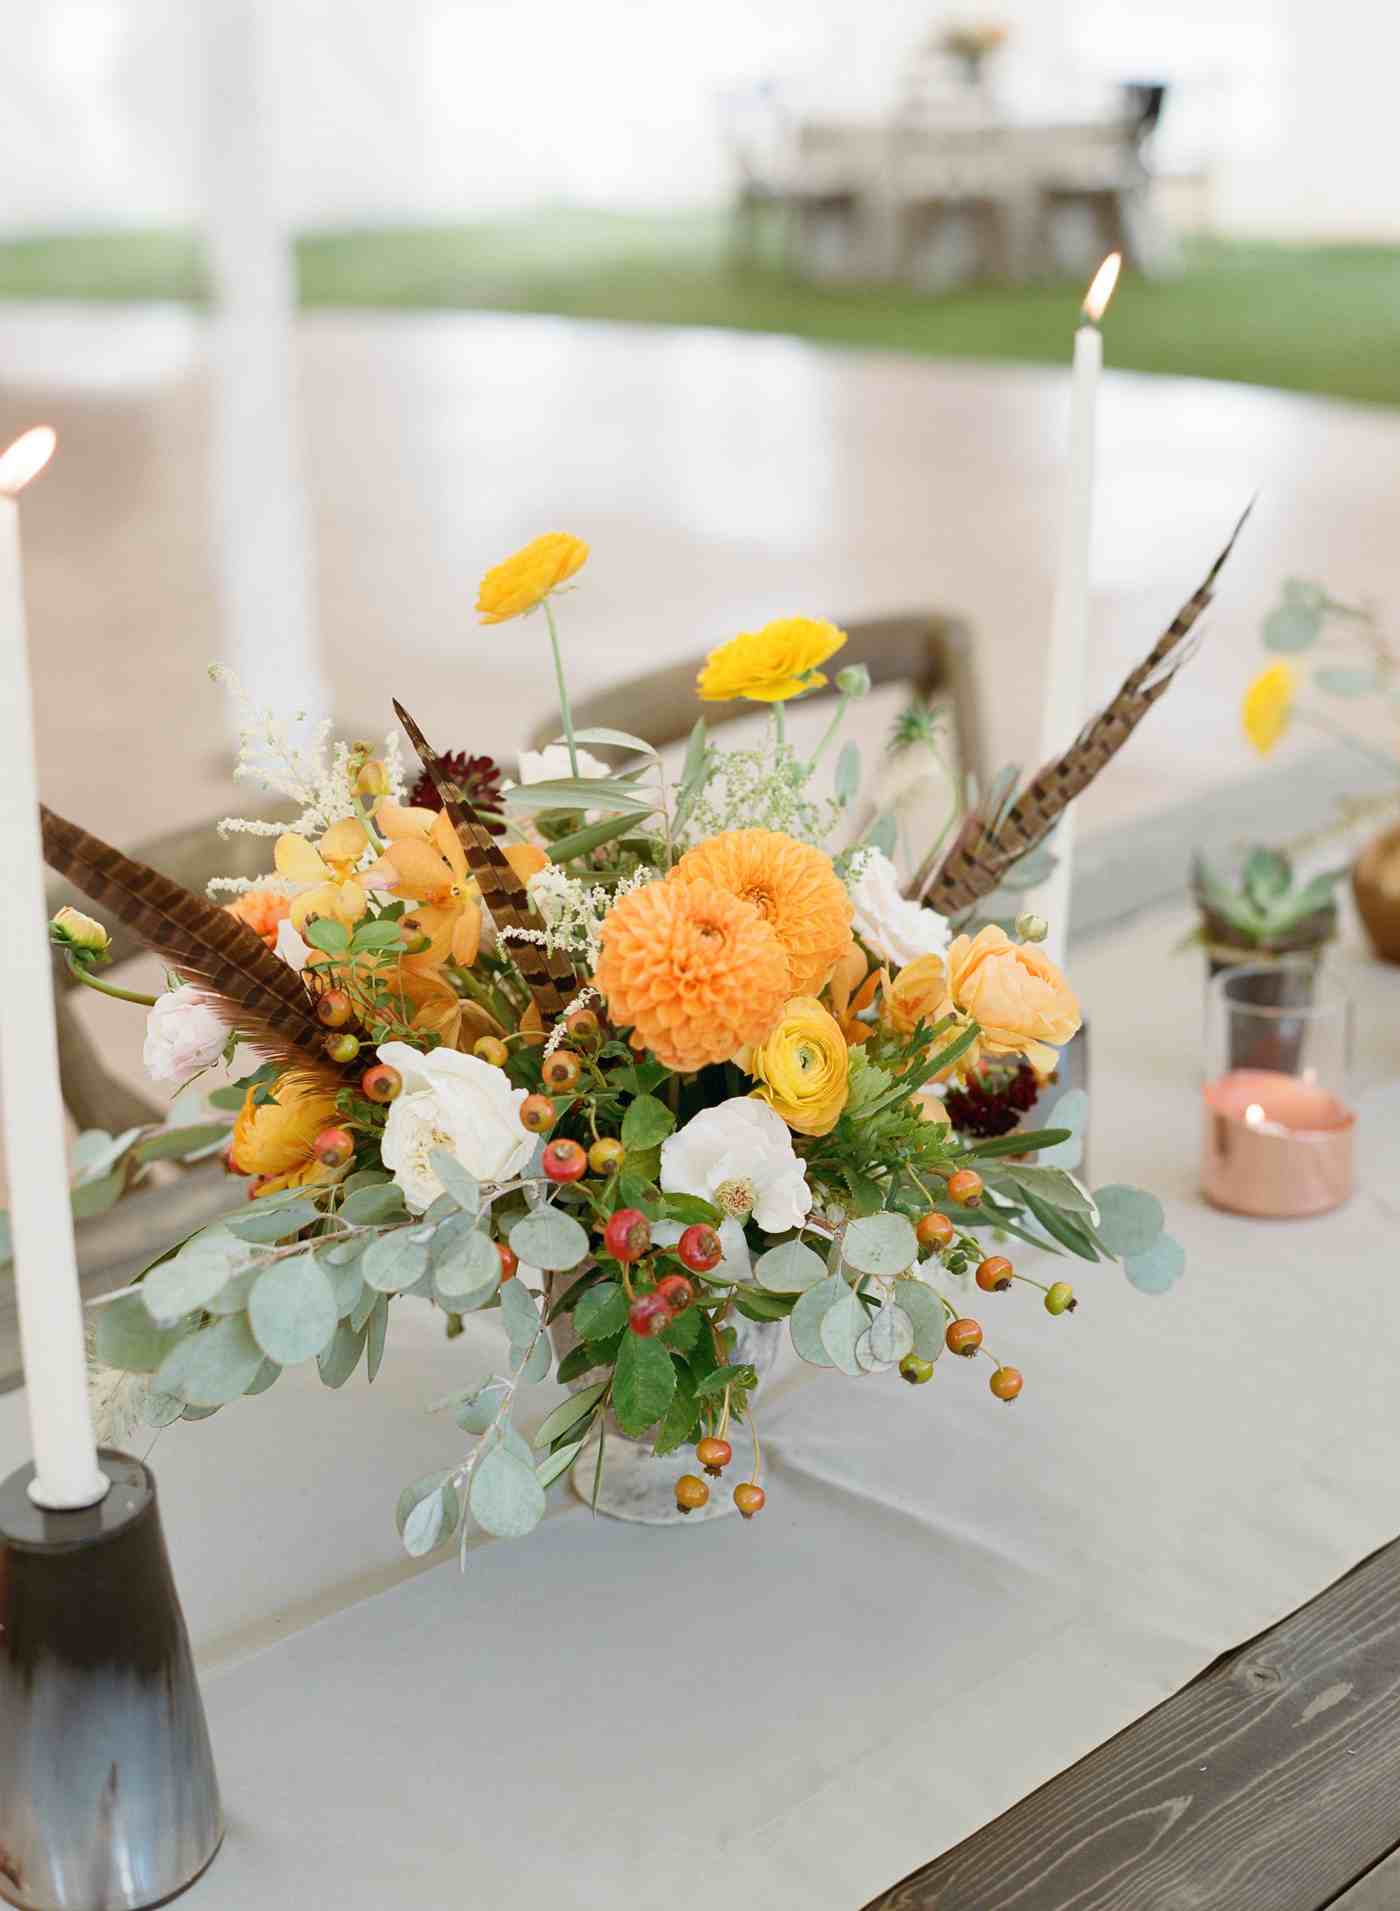 Autumn table cloth with dahlias and feathers in yellow color with white accents